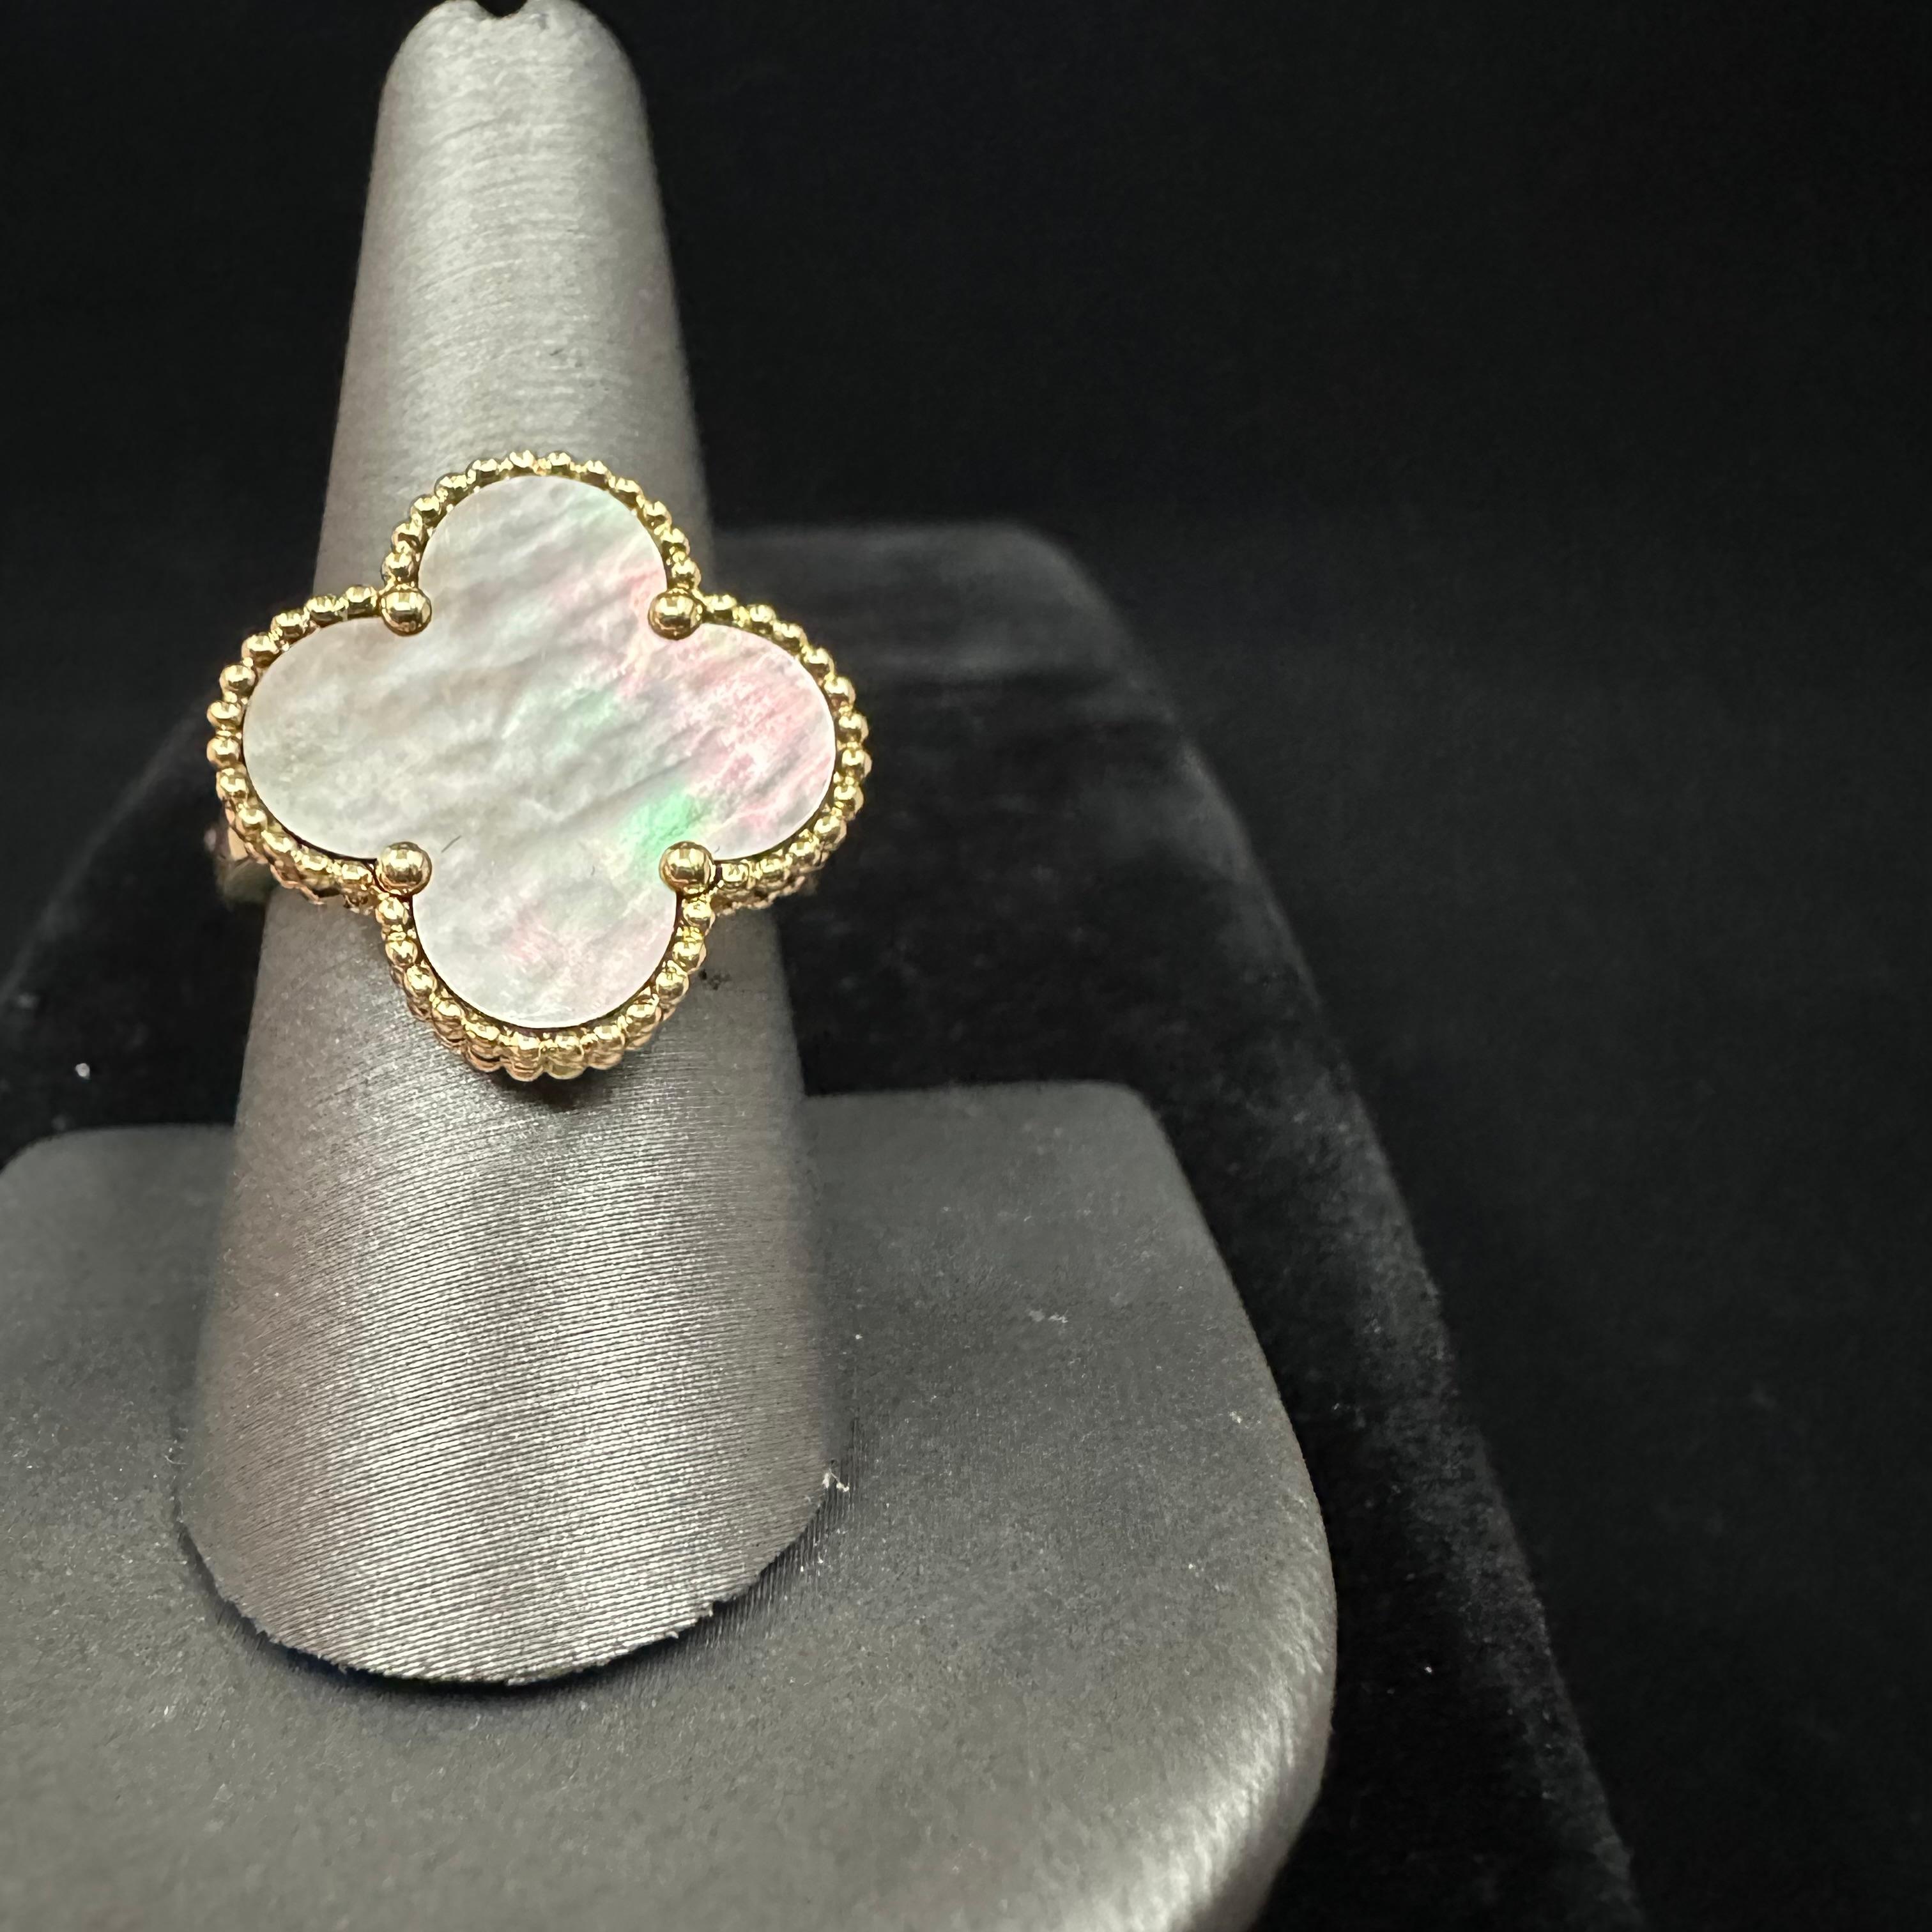 Magic Alhambra Gray Mother of Pearl 
size 58
Mother of Pearl is from French Polynesia.
20mm by 20 mm MOP top
18k Yellow Gold 
Signed and numbered jb335115 eagles head Hallmark and workshop Hallmark 

About The Fine MOP:
For white mother-of-pearl,